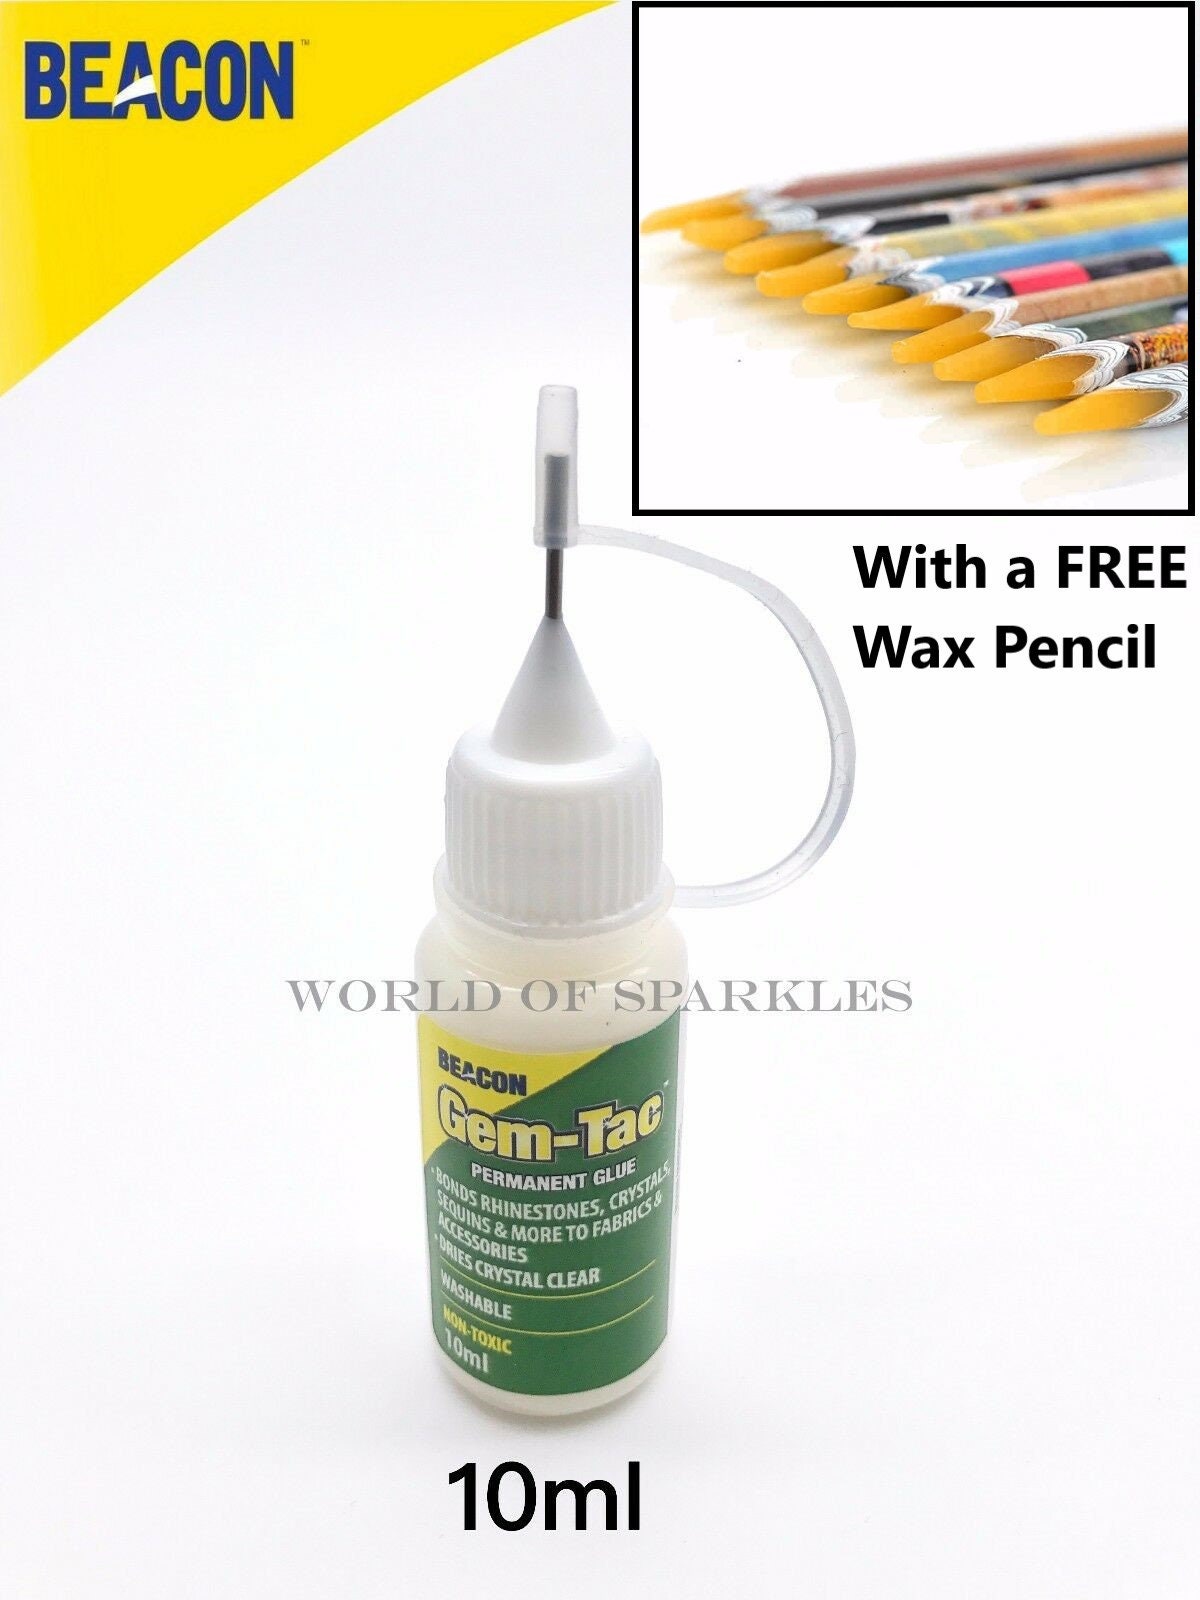 10ml Gem-tac Glue for Diamond Crystal Applying Needle Precision Tip Bottle  for Clothing Crafts Projects Banner Making With 1 Free Wax Pencil 